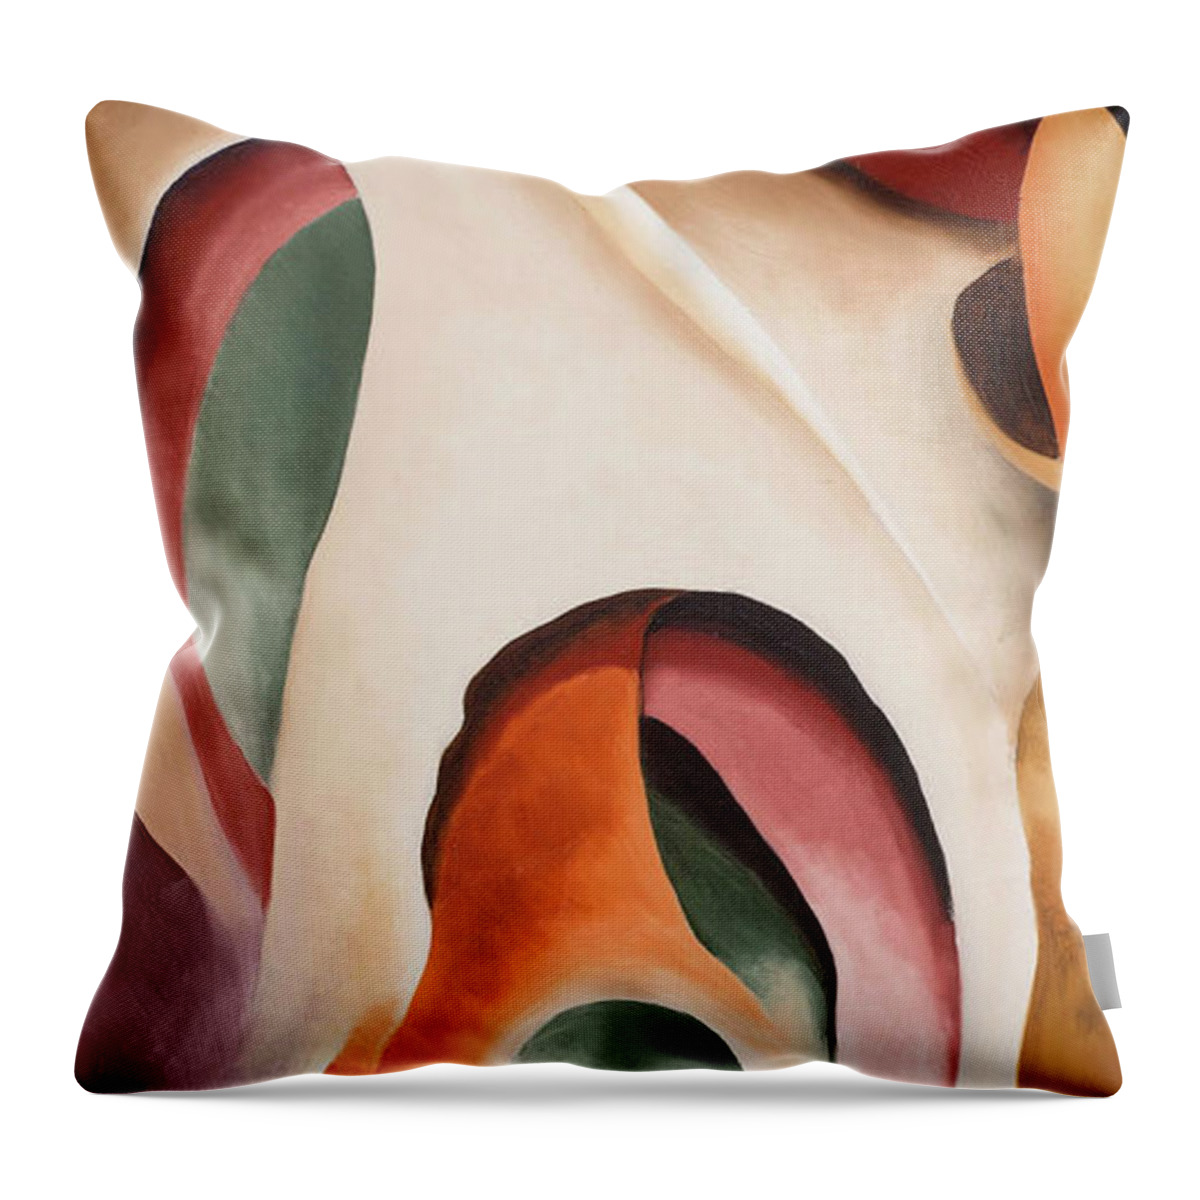 Georgia O'keeffe Throw Pillow featuring the painting Leaf motif No 2 - Colorful modernist abstract nature painting by Georgia O'Keeffe